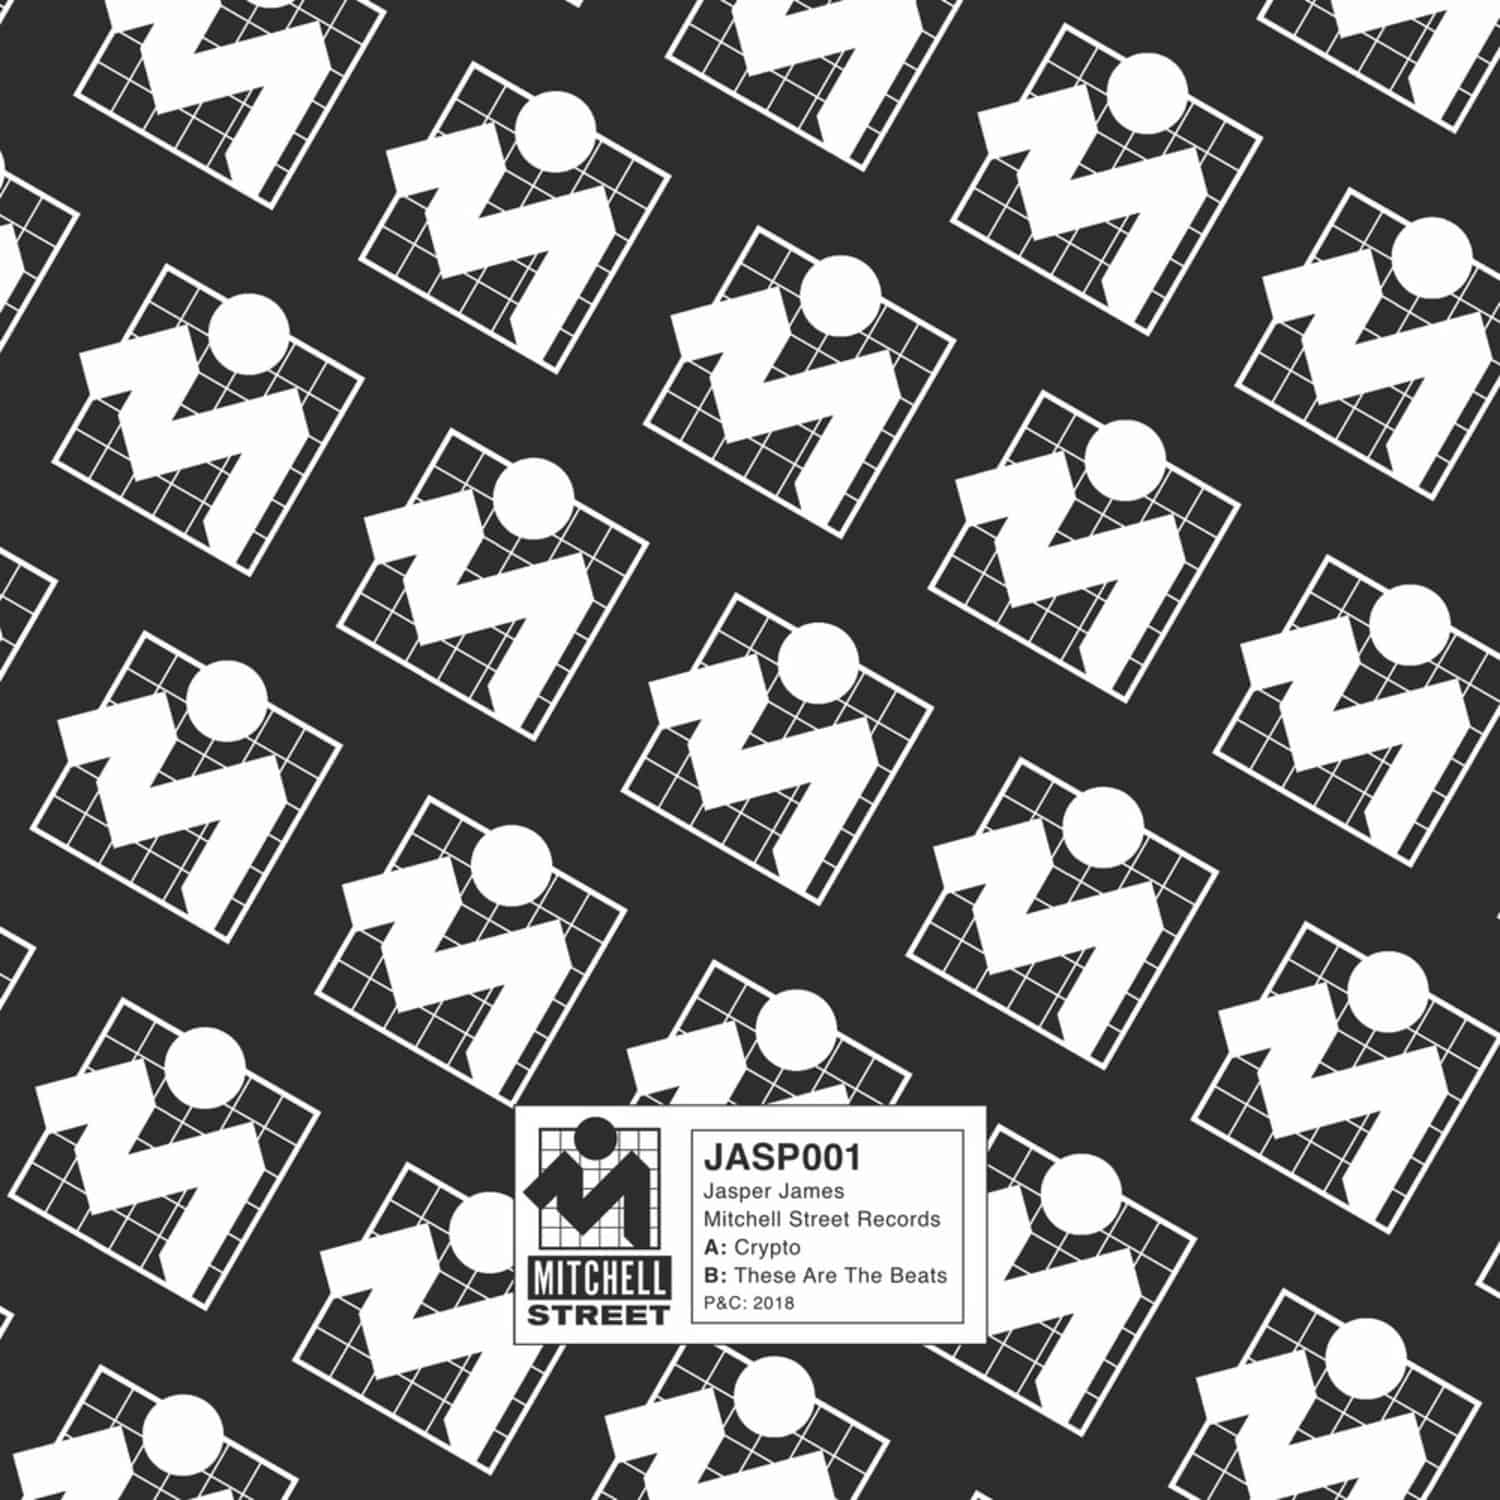 Jasper James - CRYPTO / THESE ARE THE BEATS